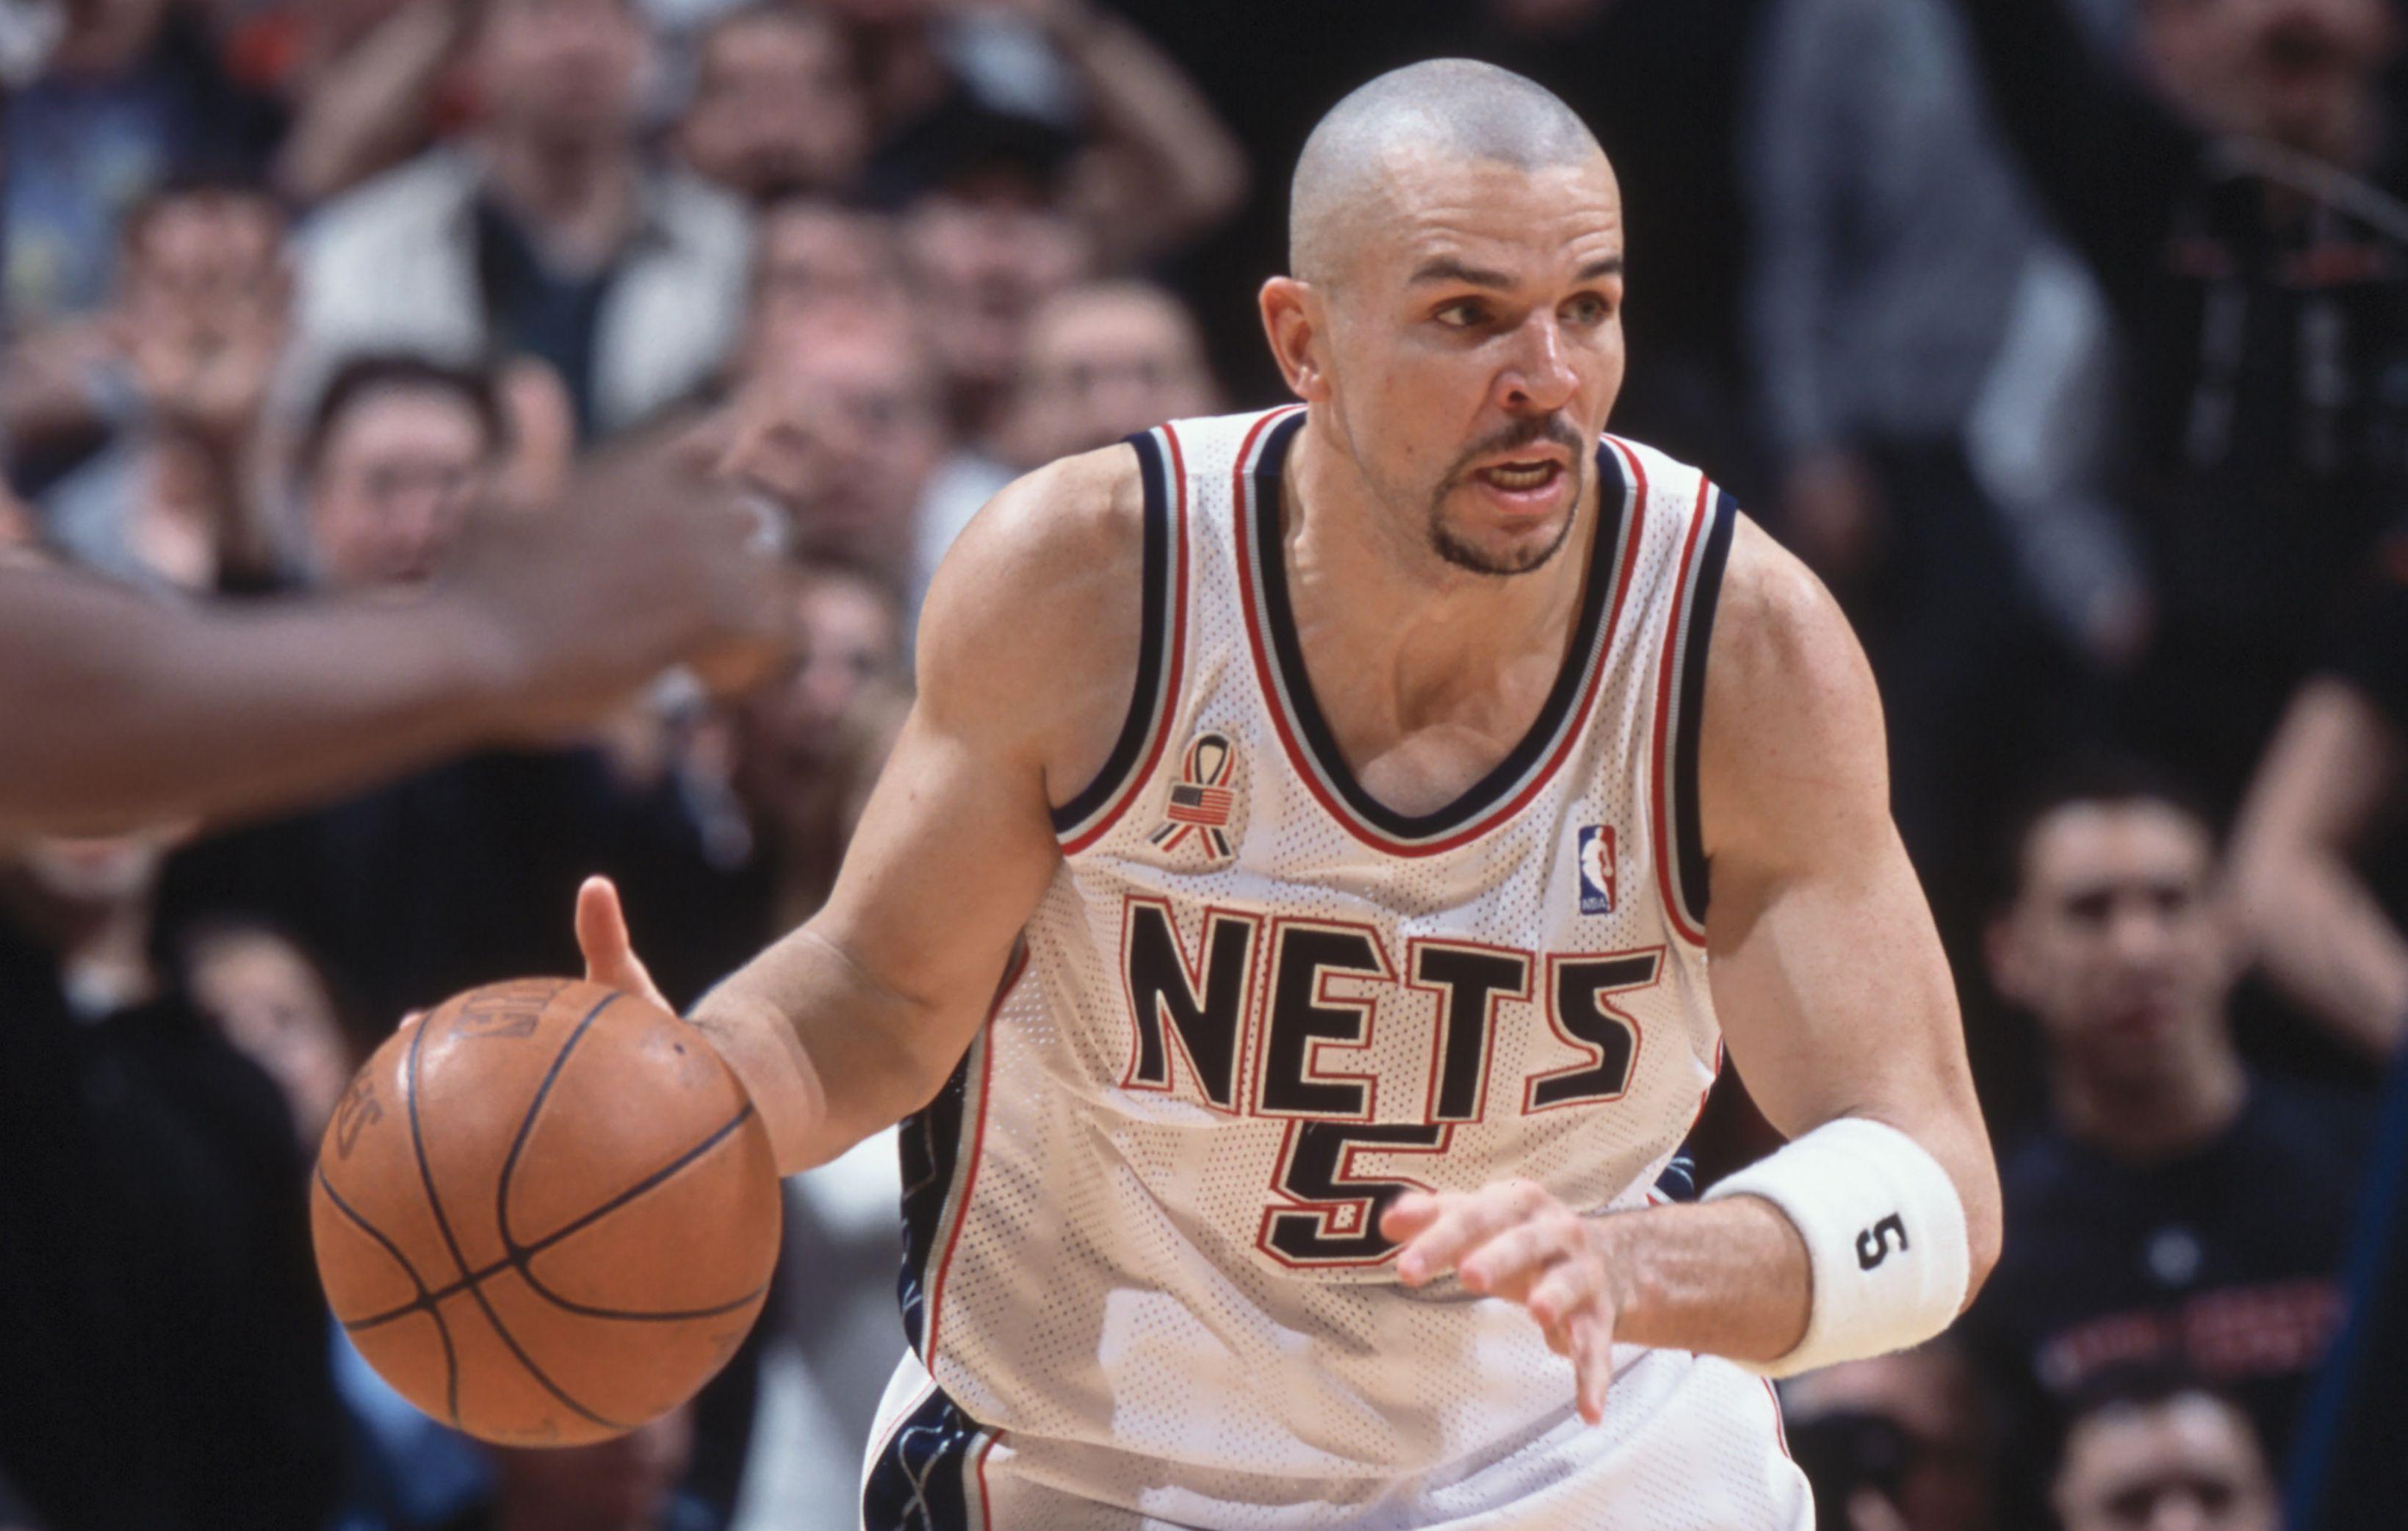 Together, Jason Kidd and the Nets soared to new heights